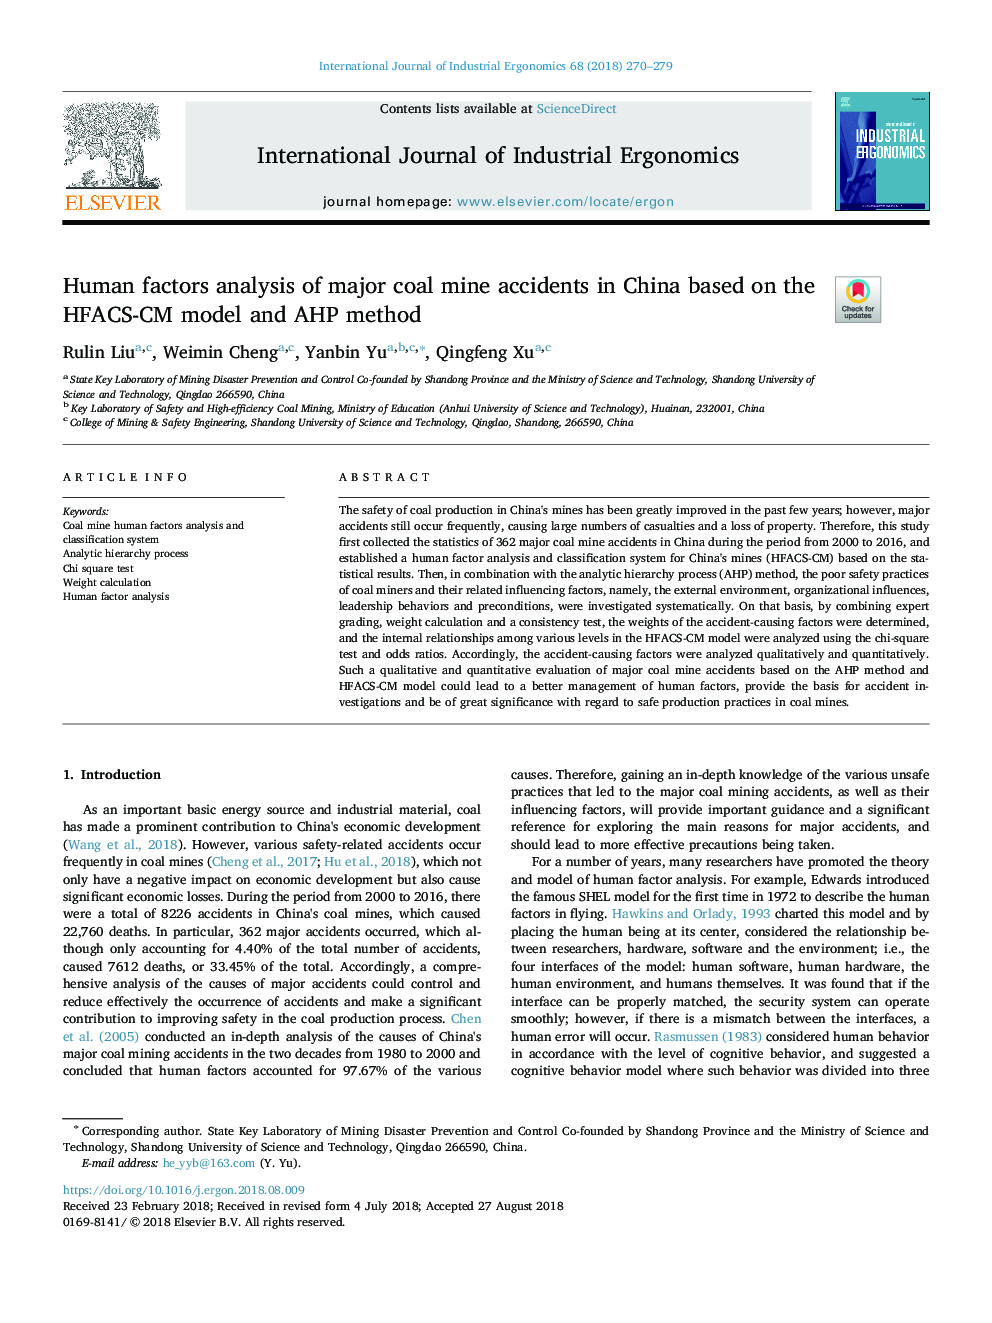 Human factors analysis of major coal mine accidents in China based on the HFACS-CM model and AHP method